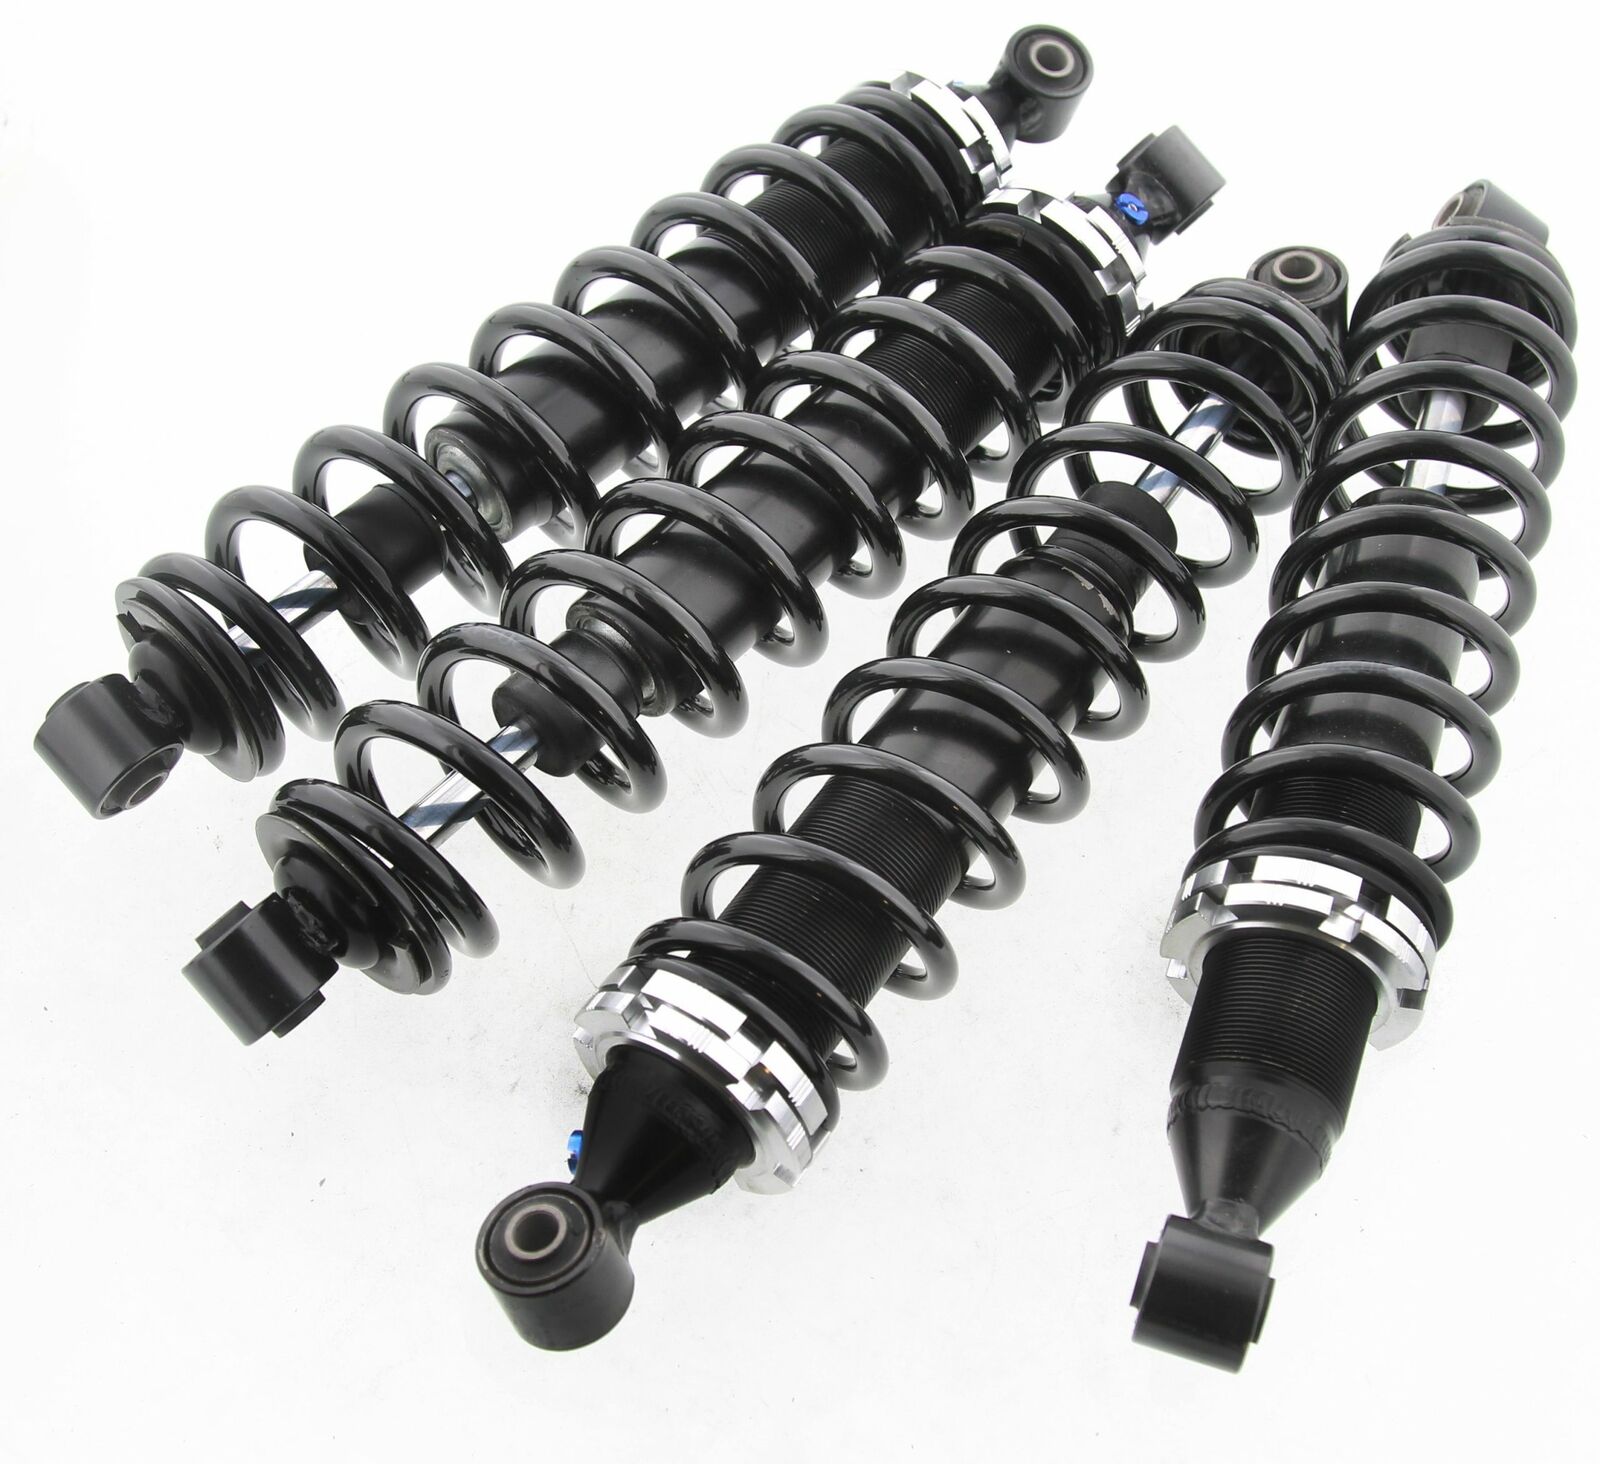 Shocks fit Yamaha Grizzly 660 YFM660 2002-08 Front & Rear Gas x4 by Race-Driven